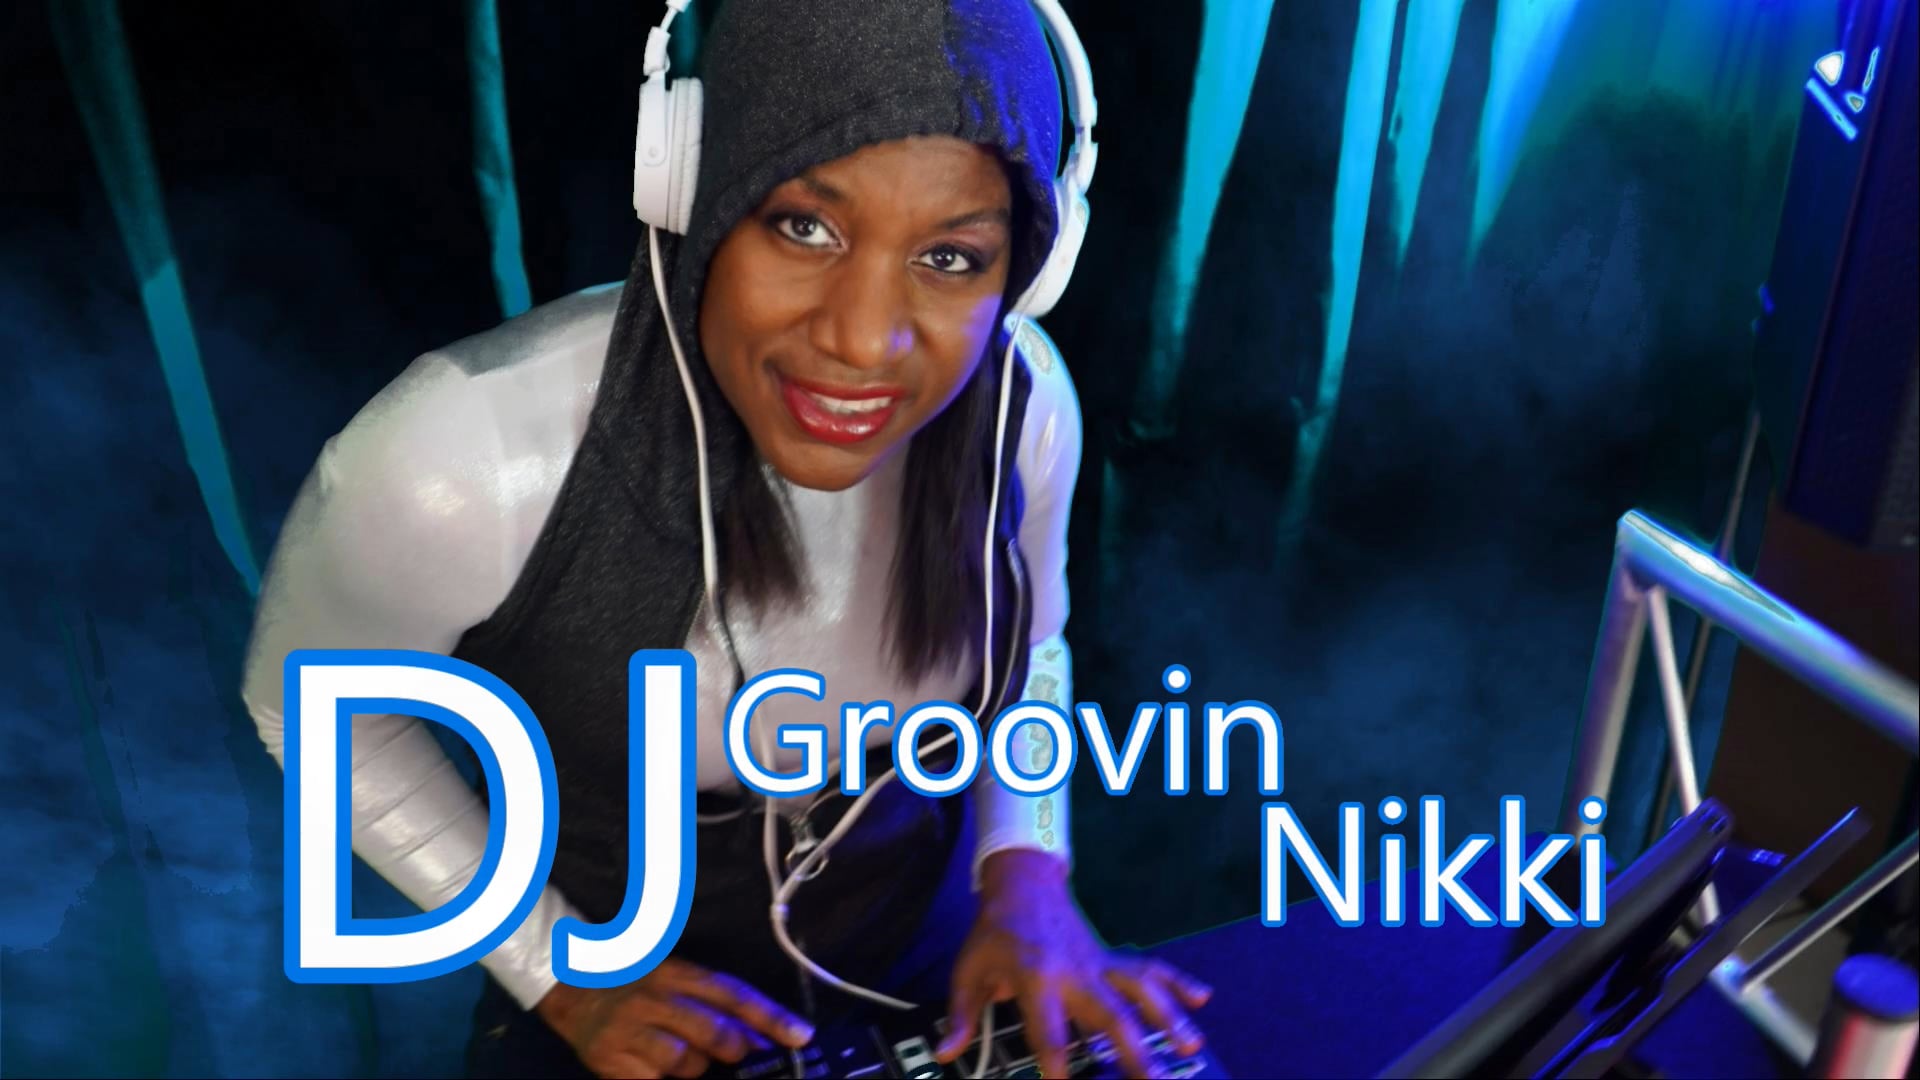 Promotional video thumbnail 1 for DJ Groovin Nikki who Sings and Dances